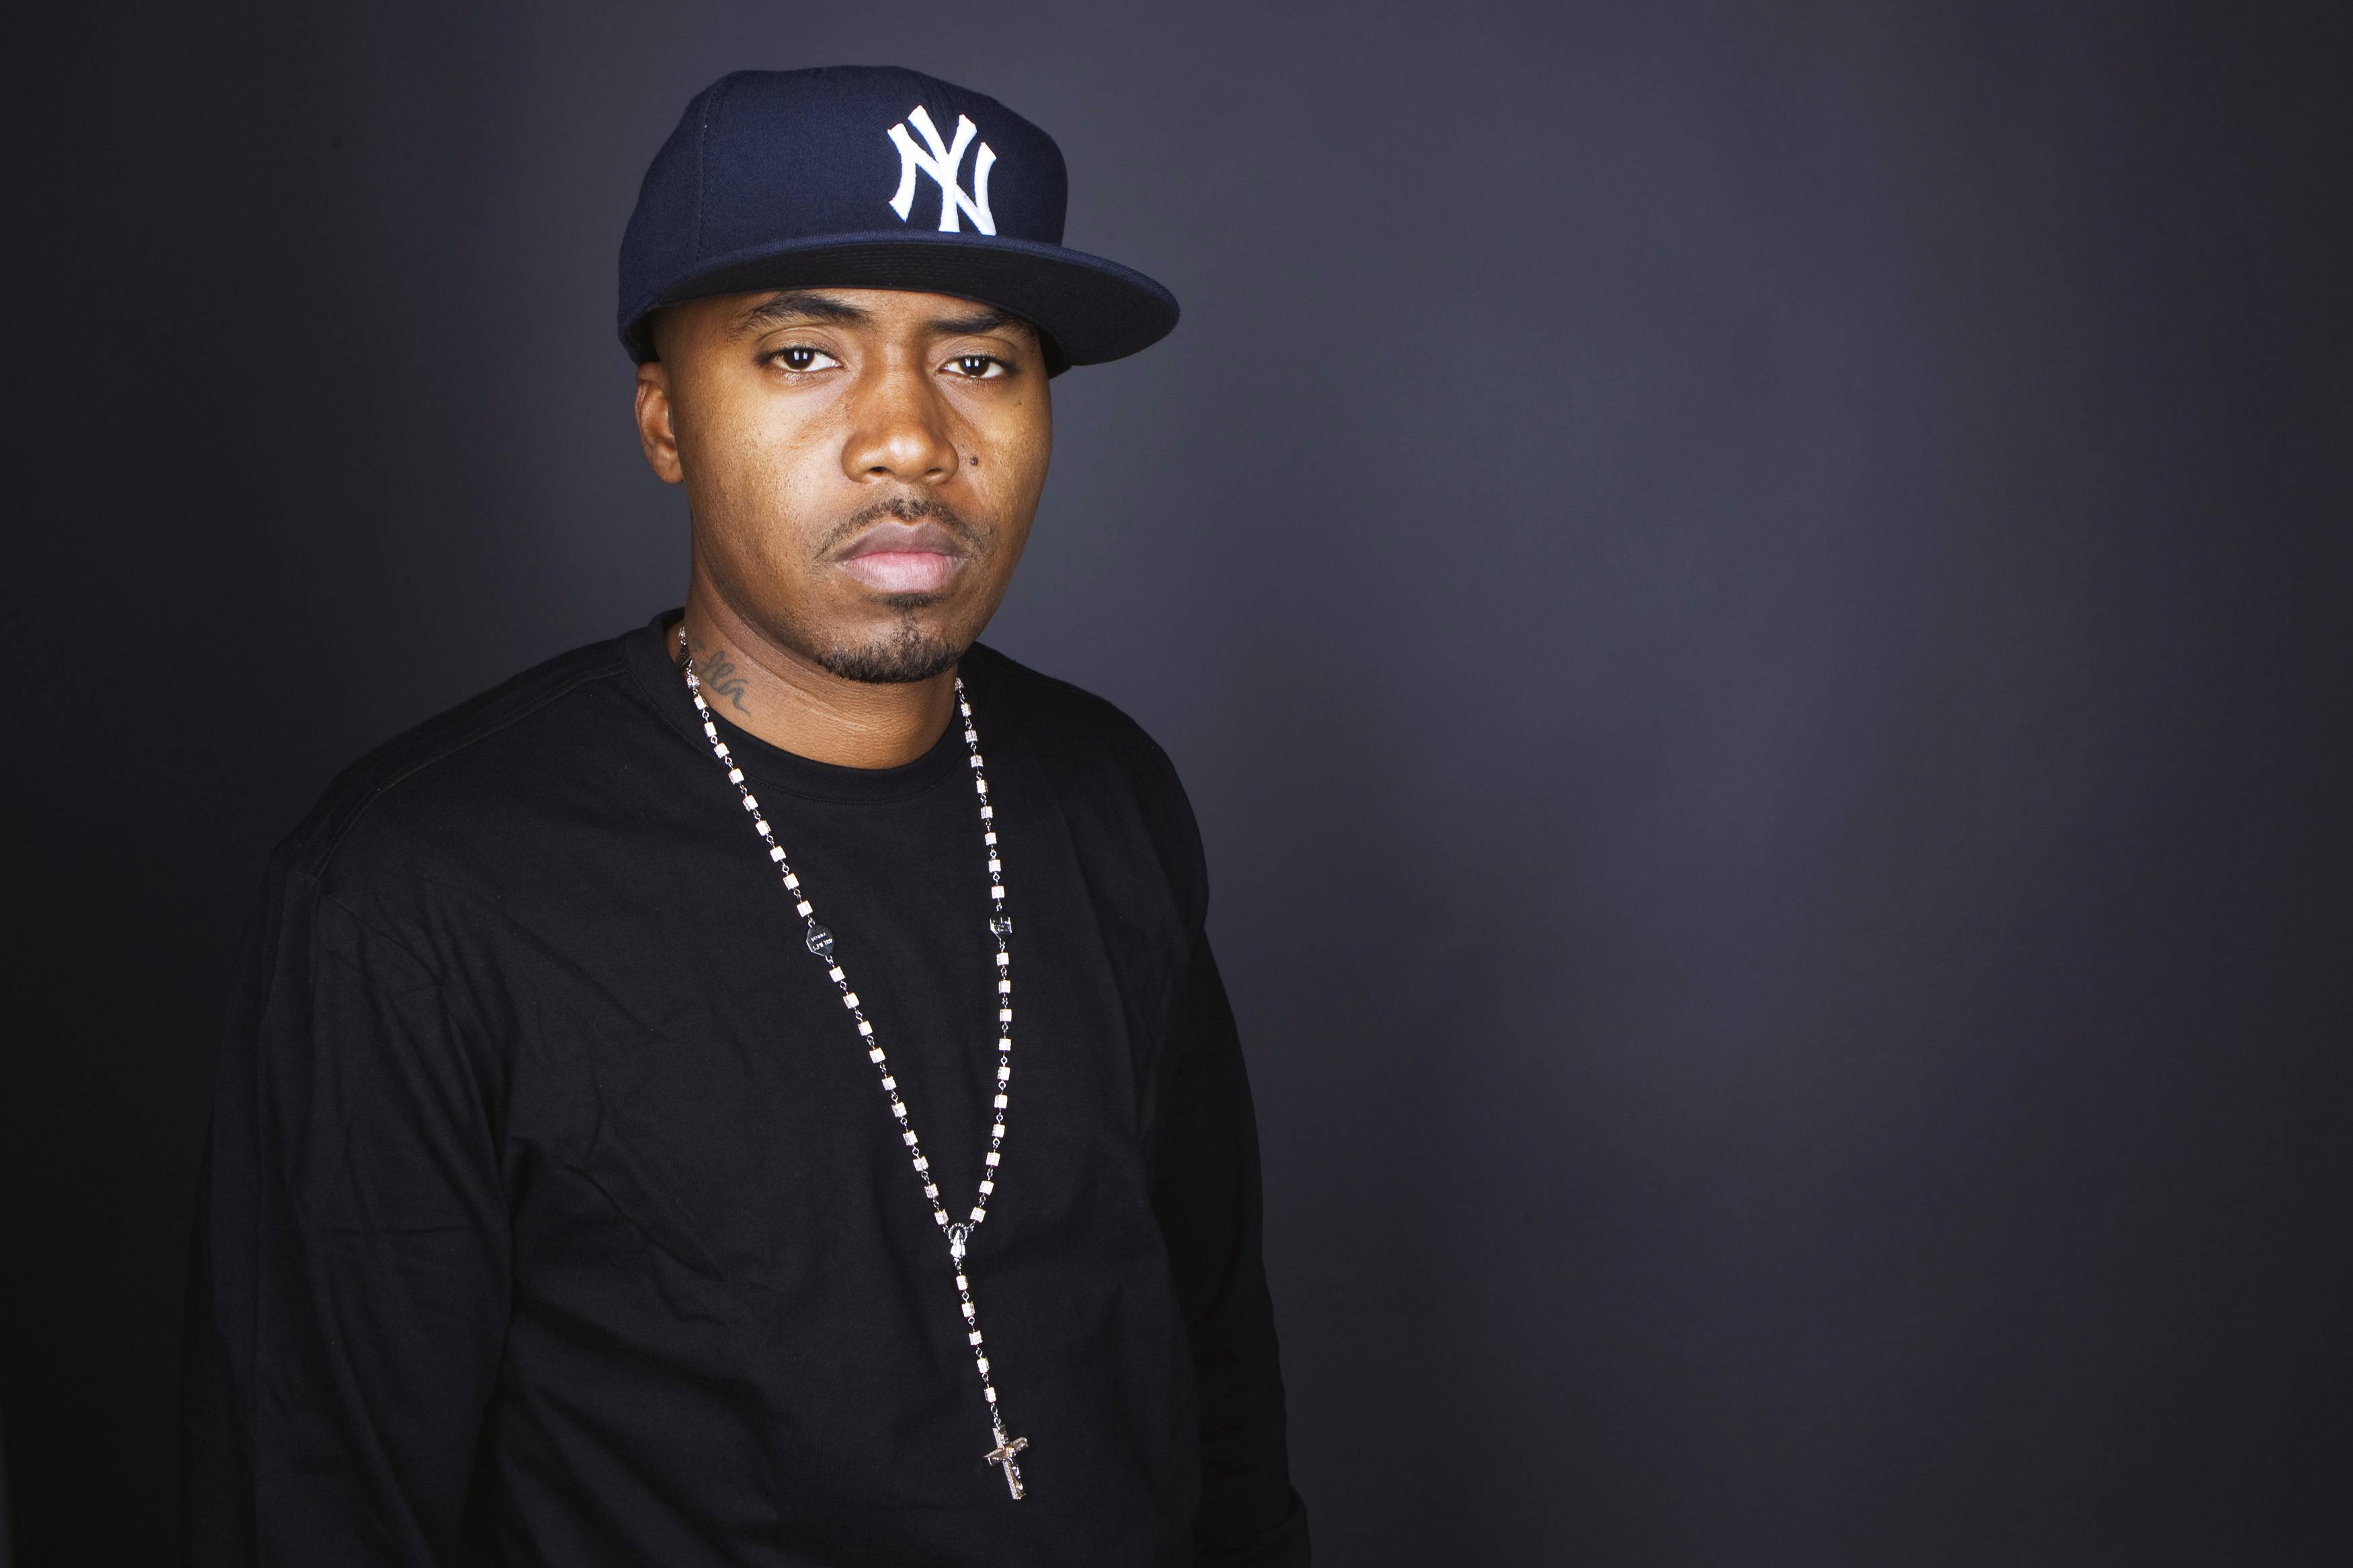 Thief's Theme: 10 Songs Where Nas Stole the Show - Nas just leaked his new heater &quot;It's a Tower Heist,&quot; featuring Rick Ross, the lead single off the official soundtrack for Tower Heist. The blatantly promotional song title might throw you off, but this song goes: epic beat, Ross's theatrics and Nas, as usual, performing lyrical grand larceny. But stealing the show is old news for Nas: He's practically built a career out of murdering MC's on their own ish. Click on for&nbsp;10 Songs where Nas stole the show.&nbsp; —Alex Gale(Photo: REUTERS/Lucas Jackson/Landov)